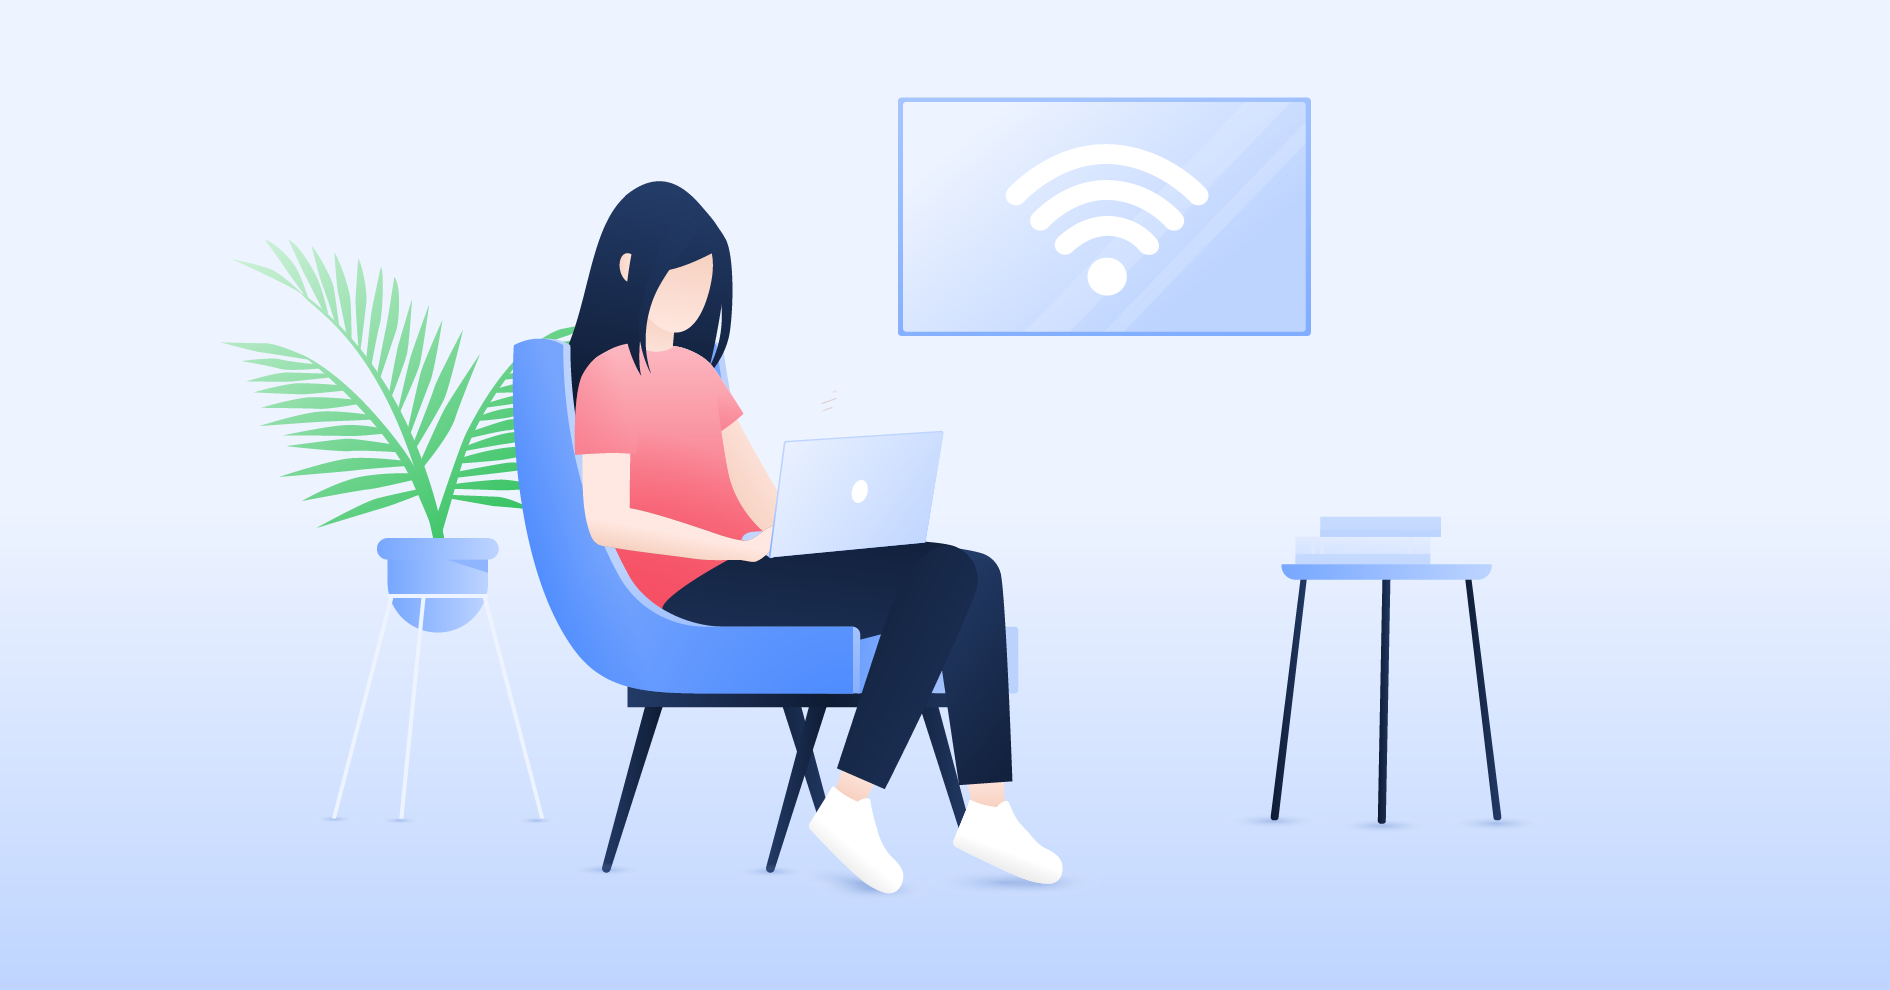 Personal Wi-Fi safety tips